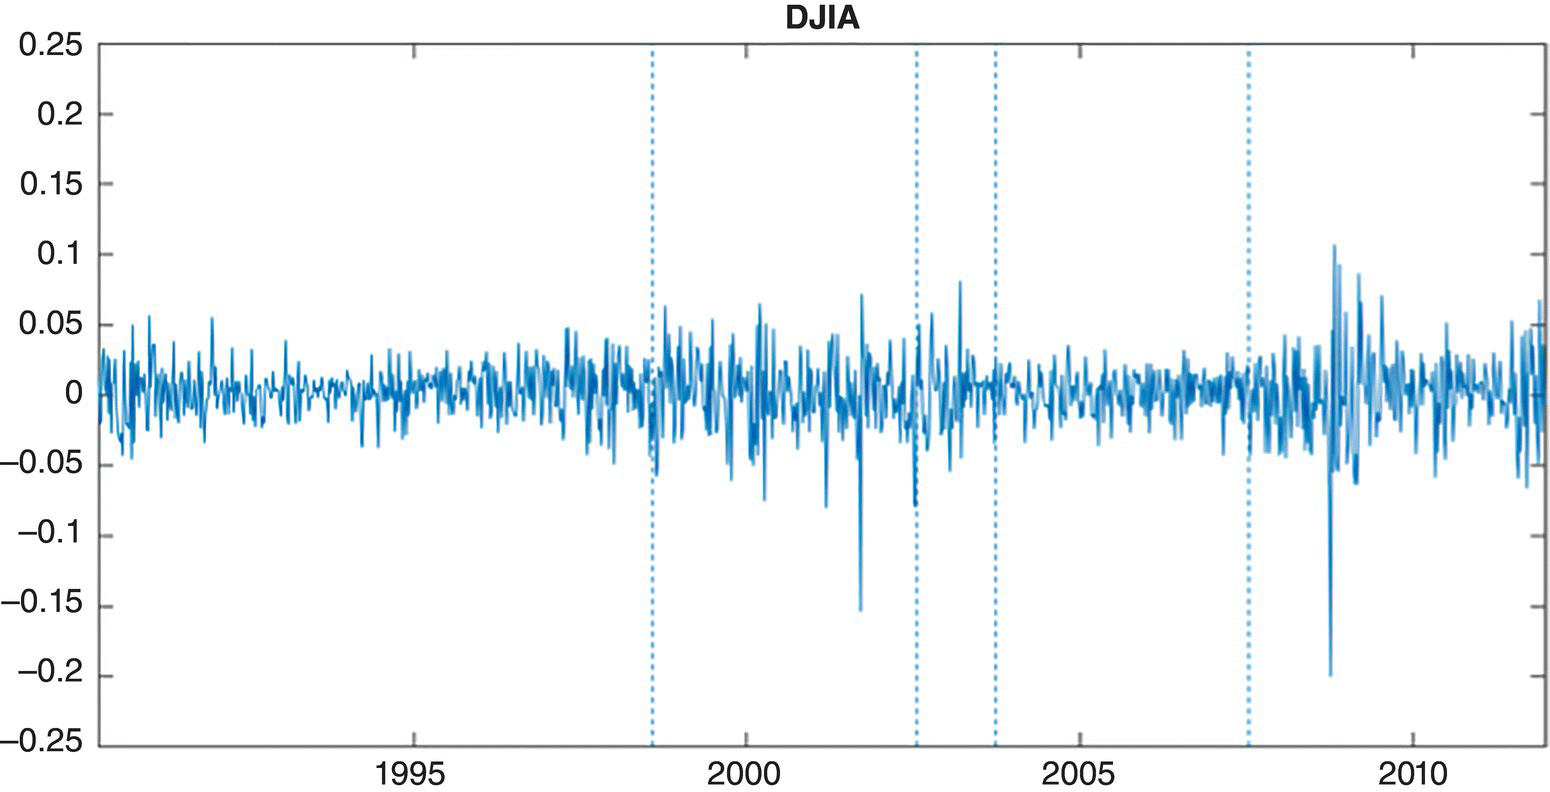 Graph displaying a fluctuating curve with 4 vertical dotted lines, illustrating the Weekly log returns for the Dow Jones from April 1990 to December 2011.